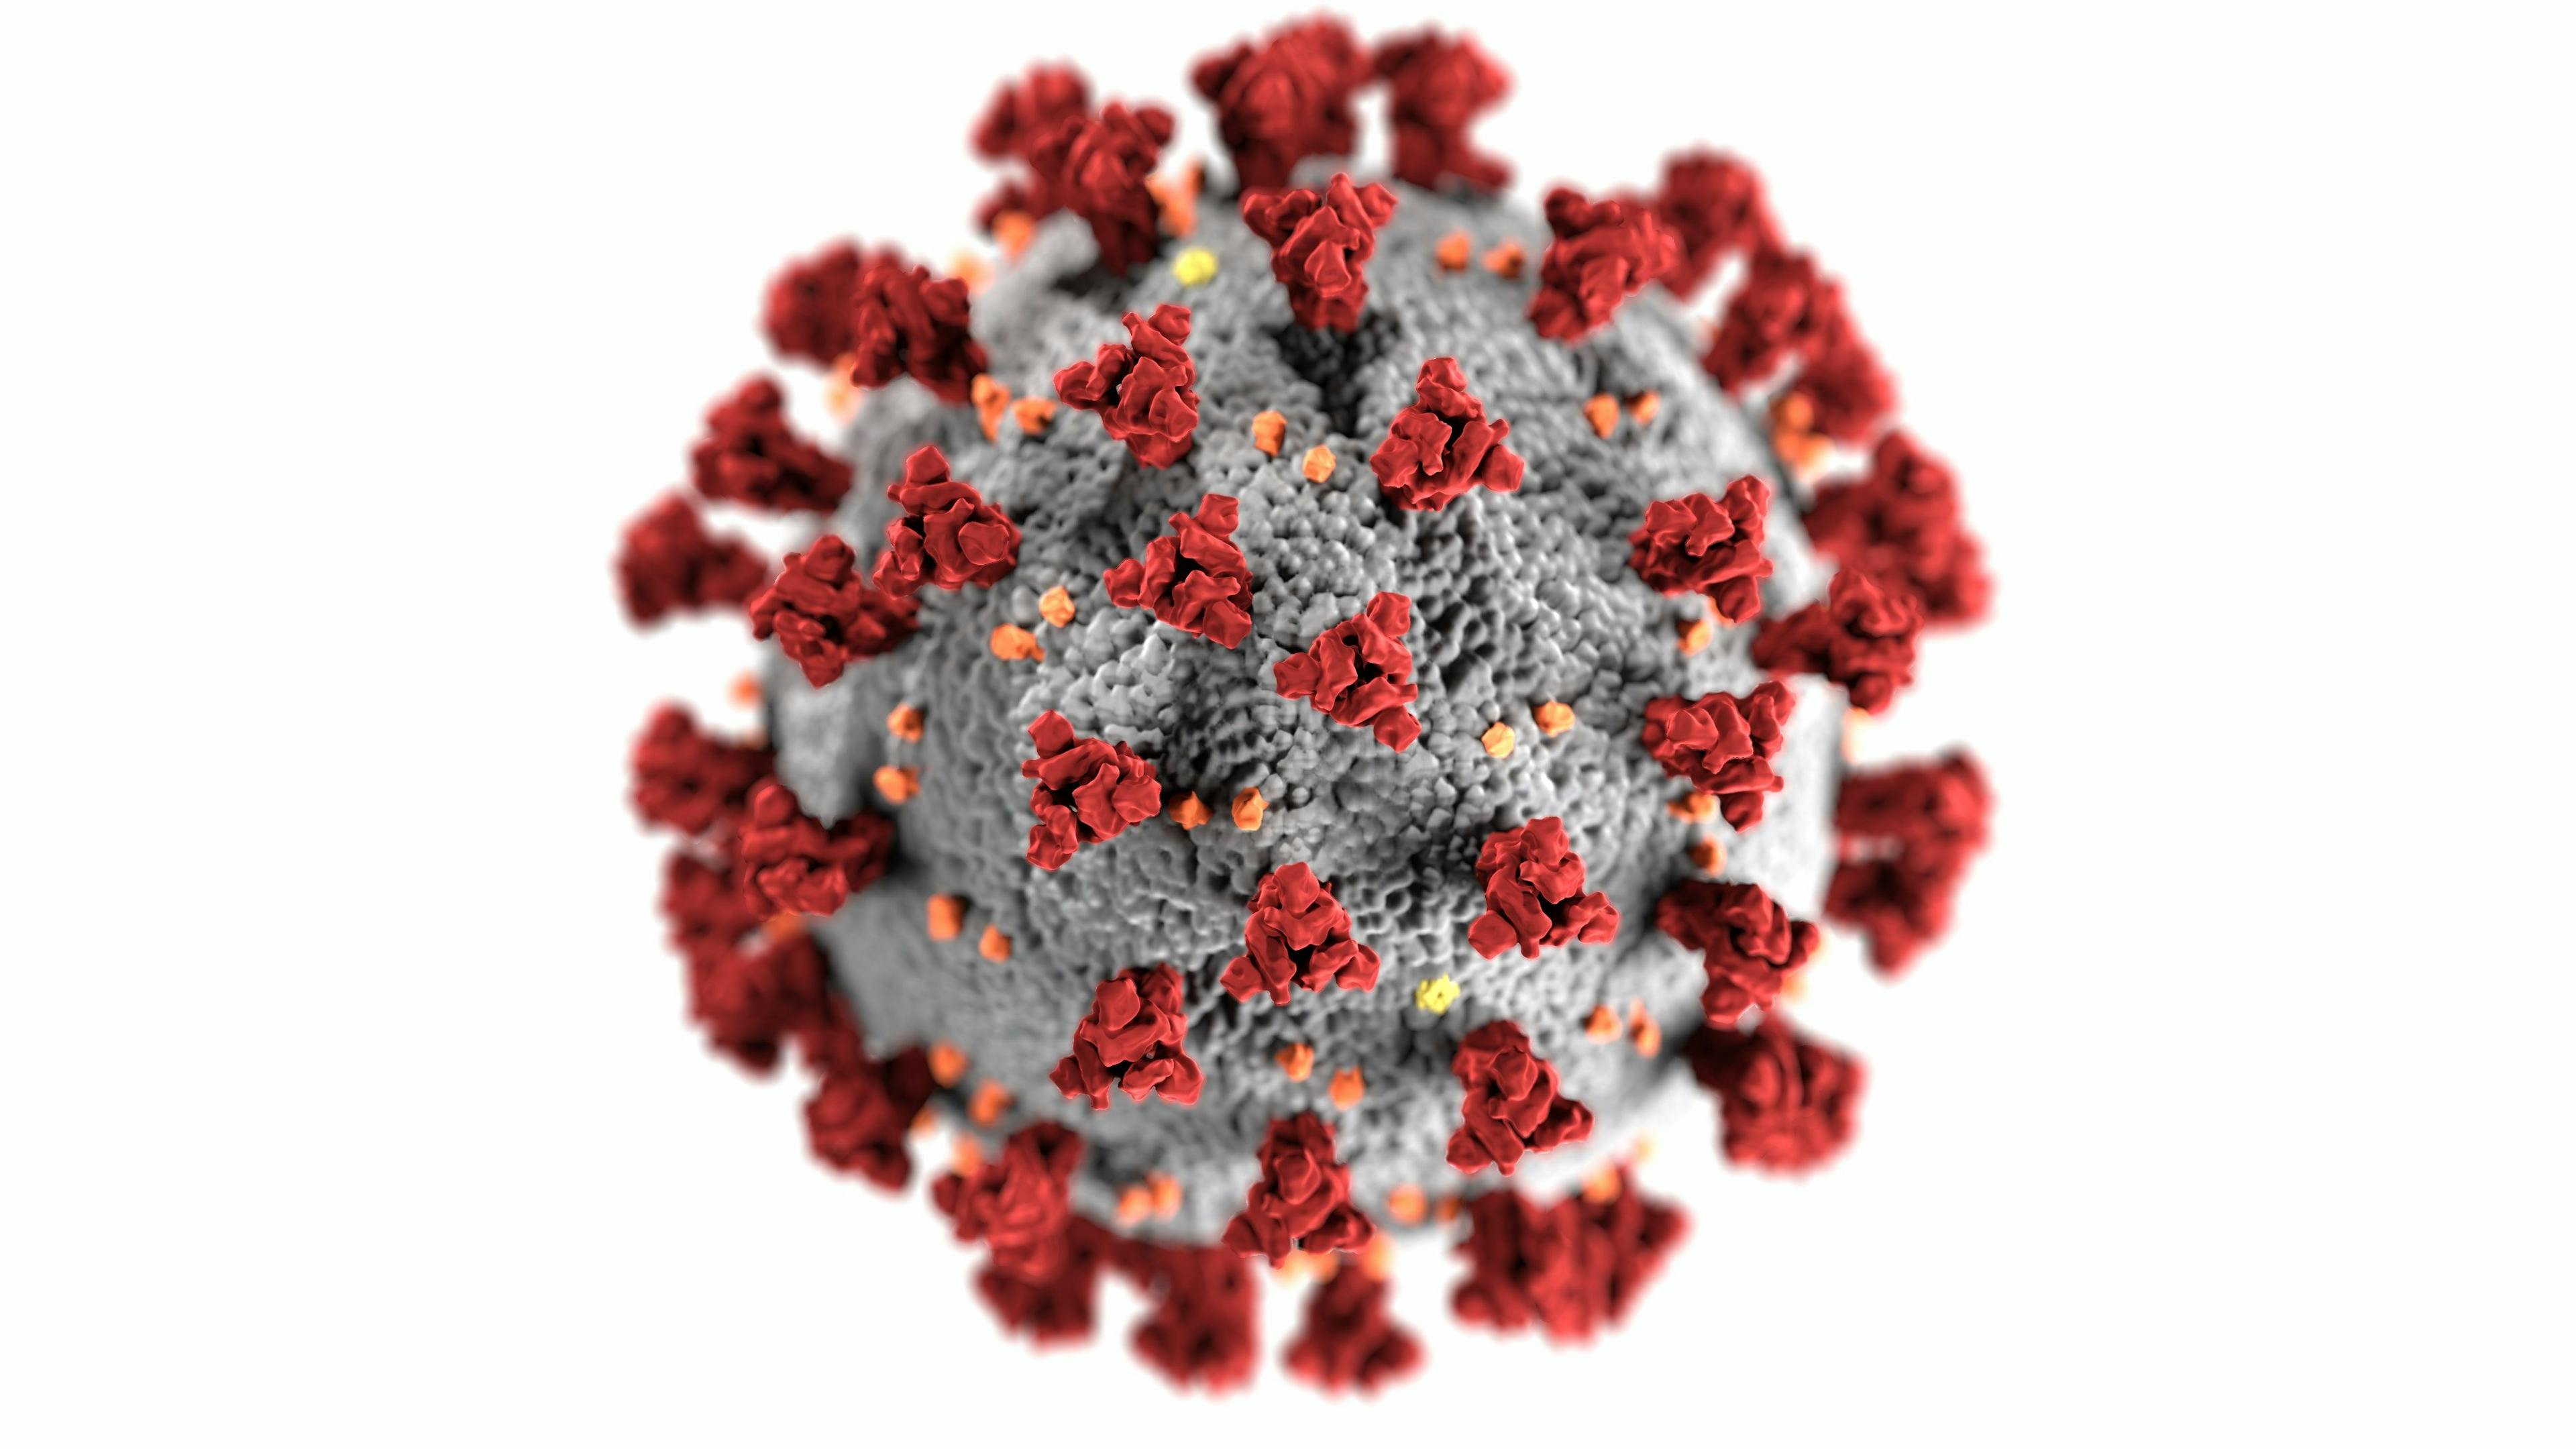 Image of COVID-19 Spike Protein |  Credit: Center for Disease Control's Public Health Image Library